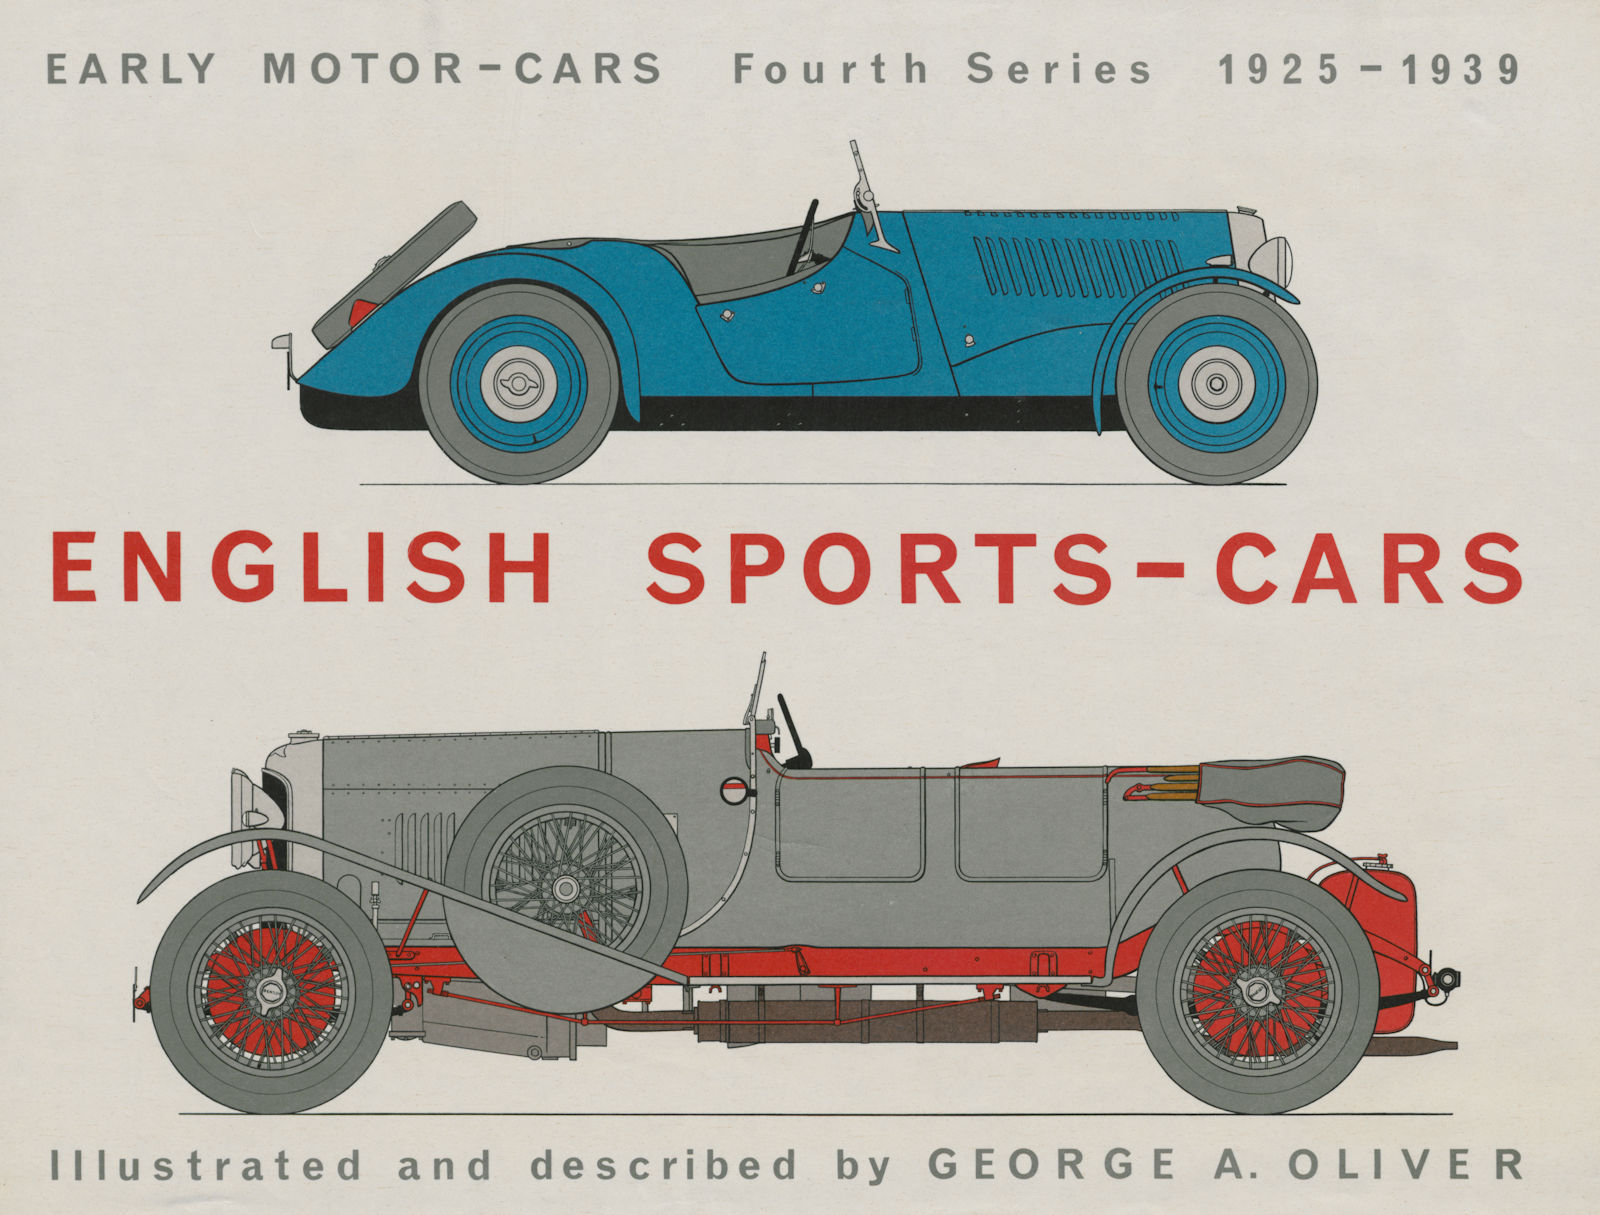 Associate Product English Sports Cars. 1937 Morgan 4/4. 1928 Bentley 4.5 litre. George Oliver 1967